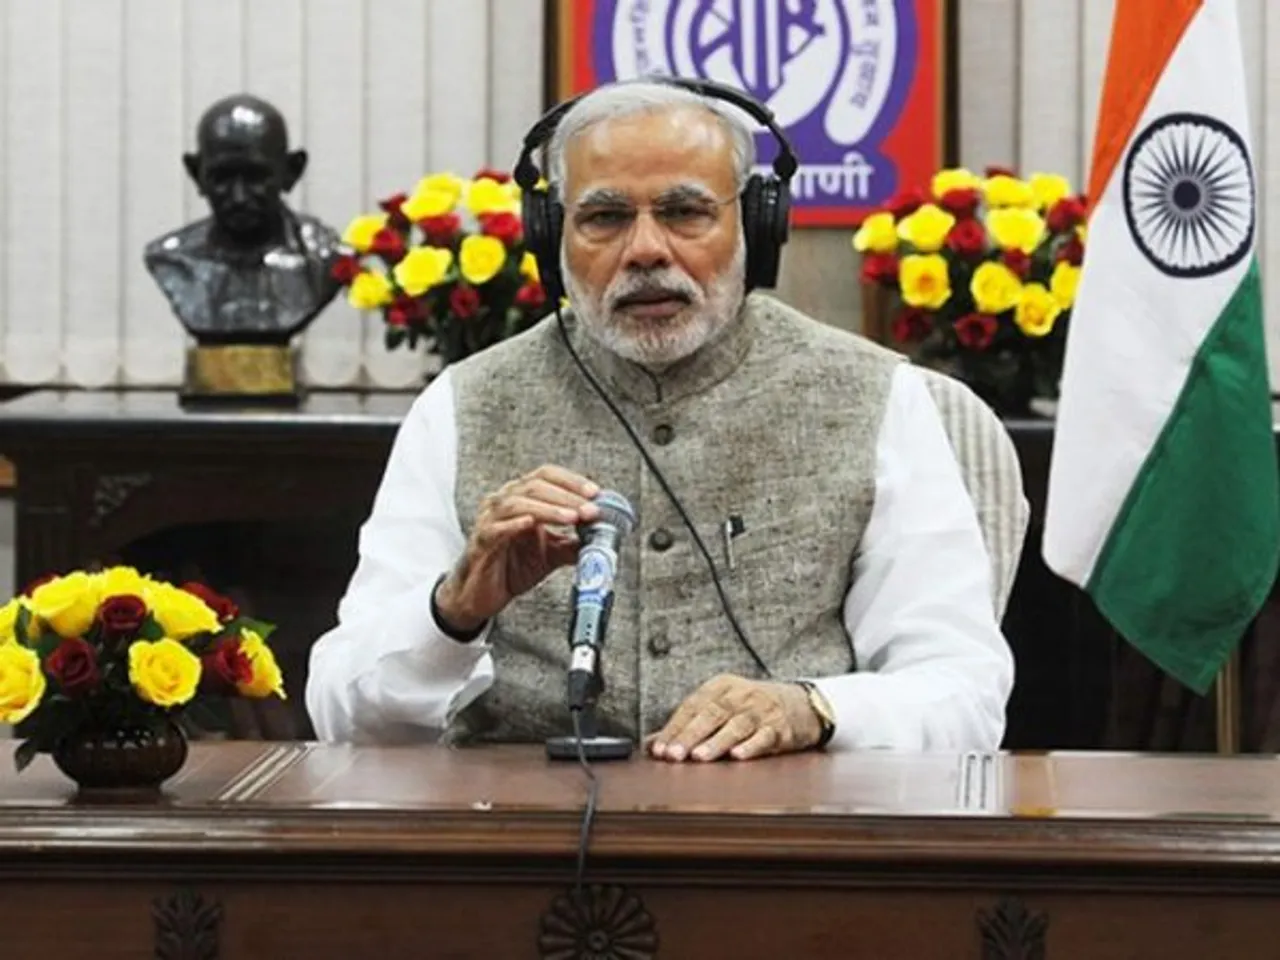 Coronavirus Lockdown for India: PM says Stay Home, Follow Rules